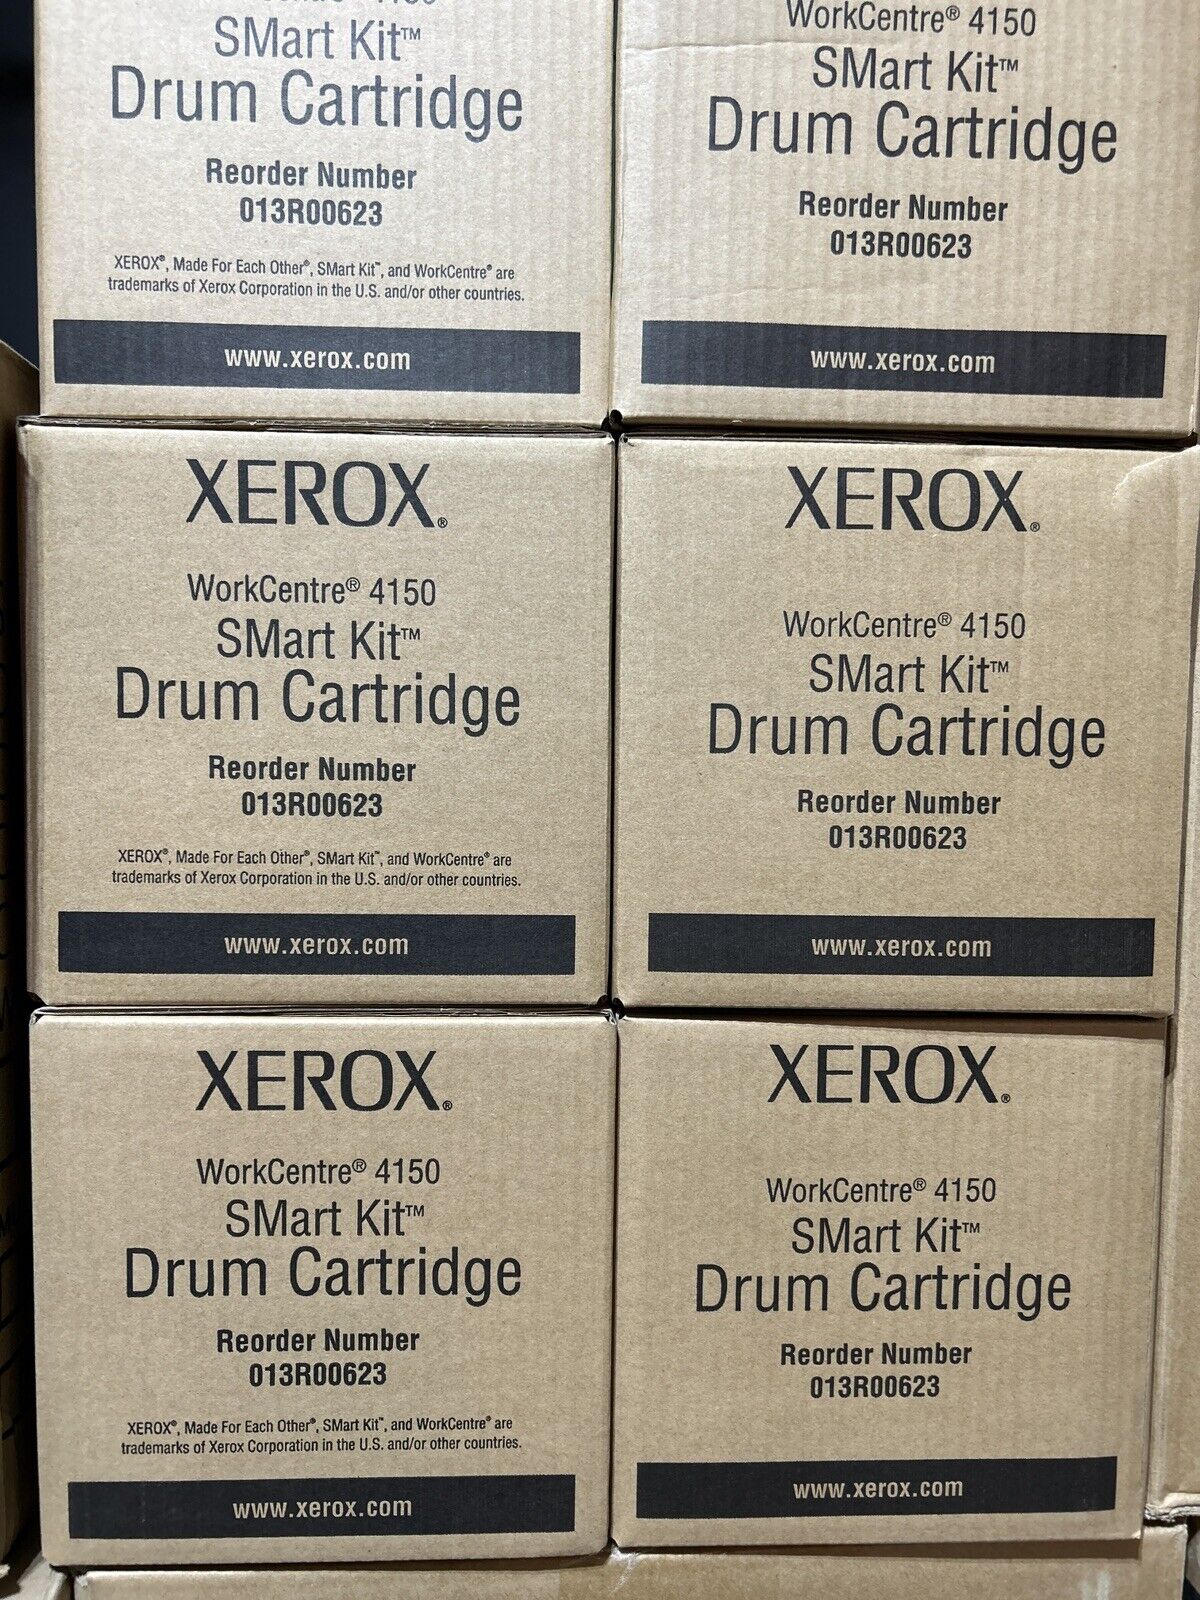 Genuine Xerox 013R00623 / 13R623 Drum Cartridge for Workcentre 4150. NEW